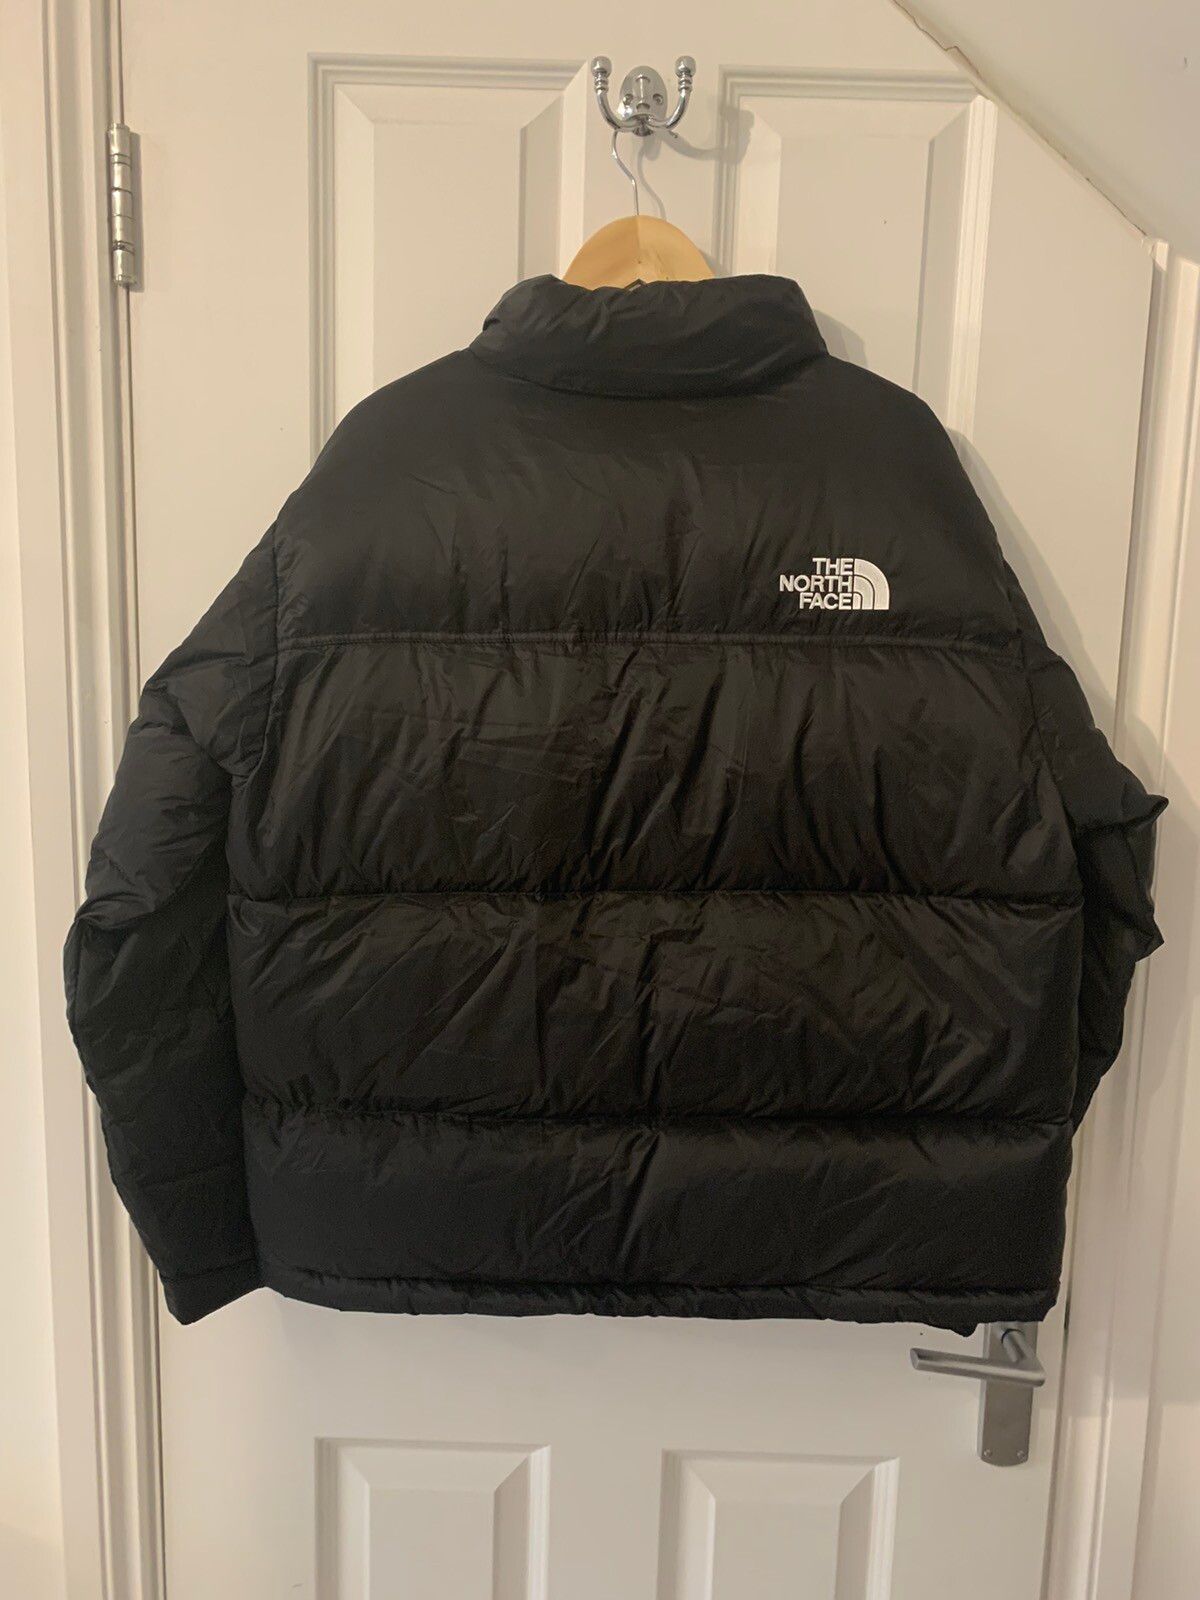 The North Face The north face DSM Dover street market nuptse 